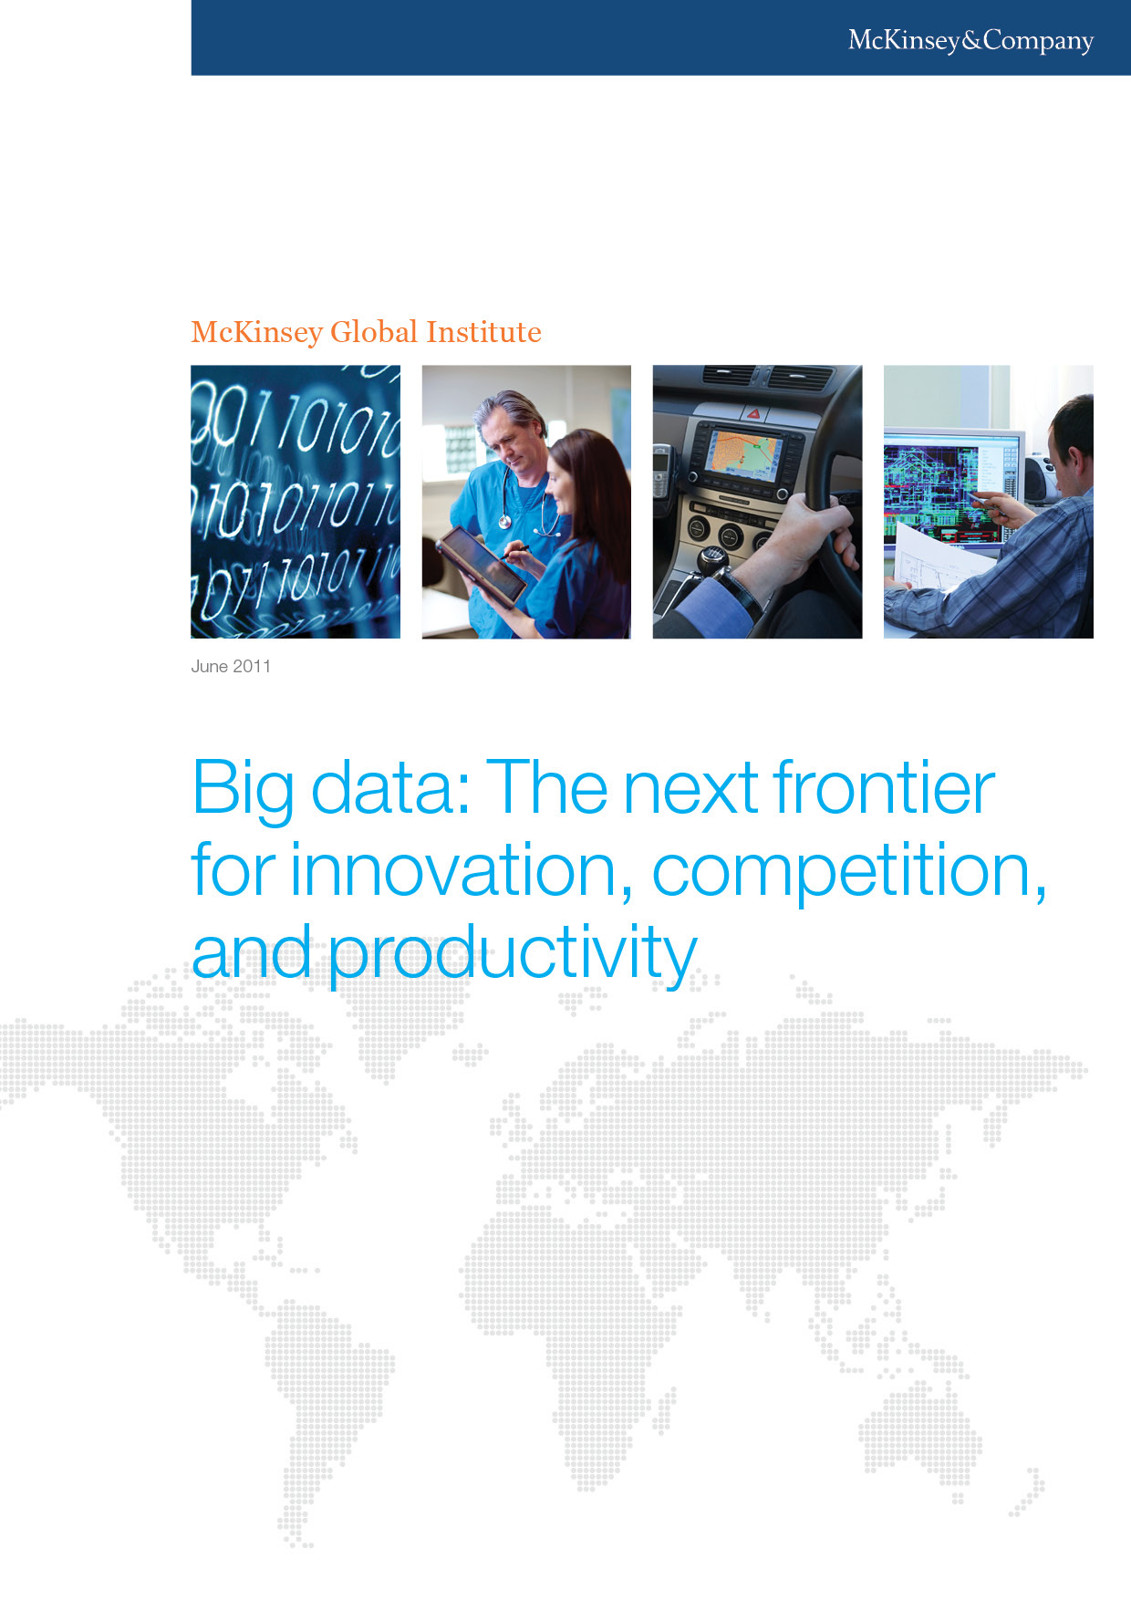 Big Data: The next frontier for innovation, competition, and productivity